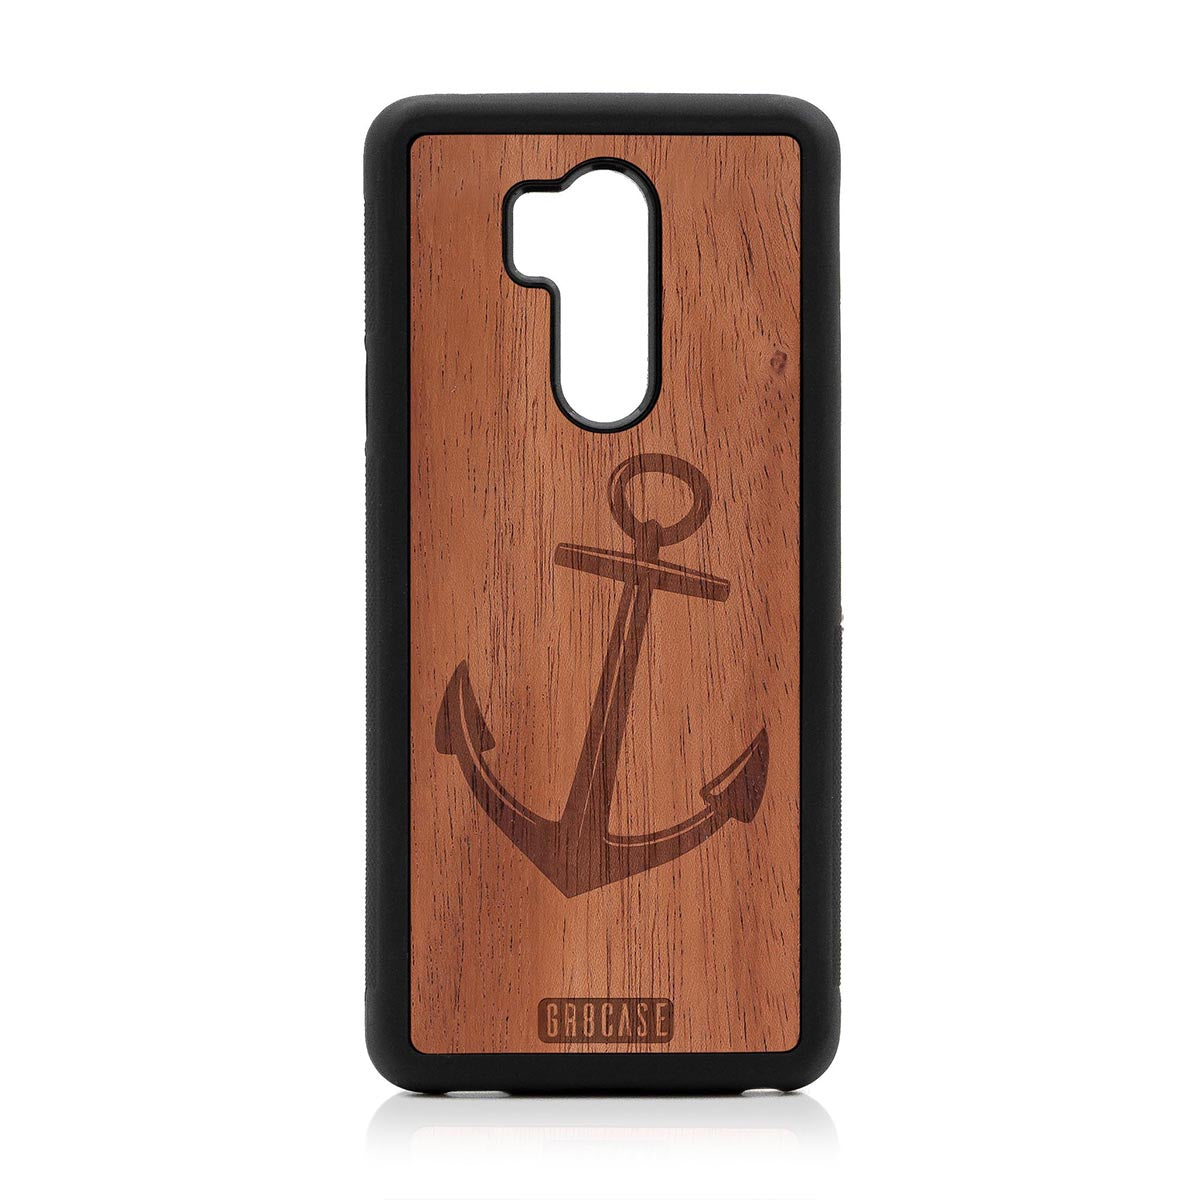 Anchor Design Wood Case For LG G7 ThinQ by GR8CASE